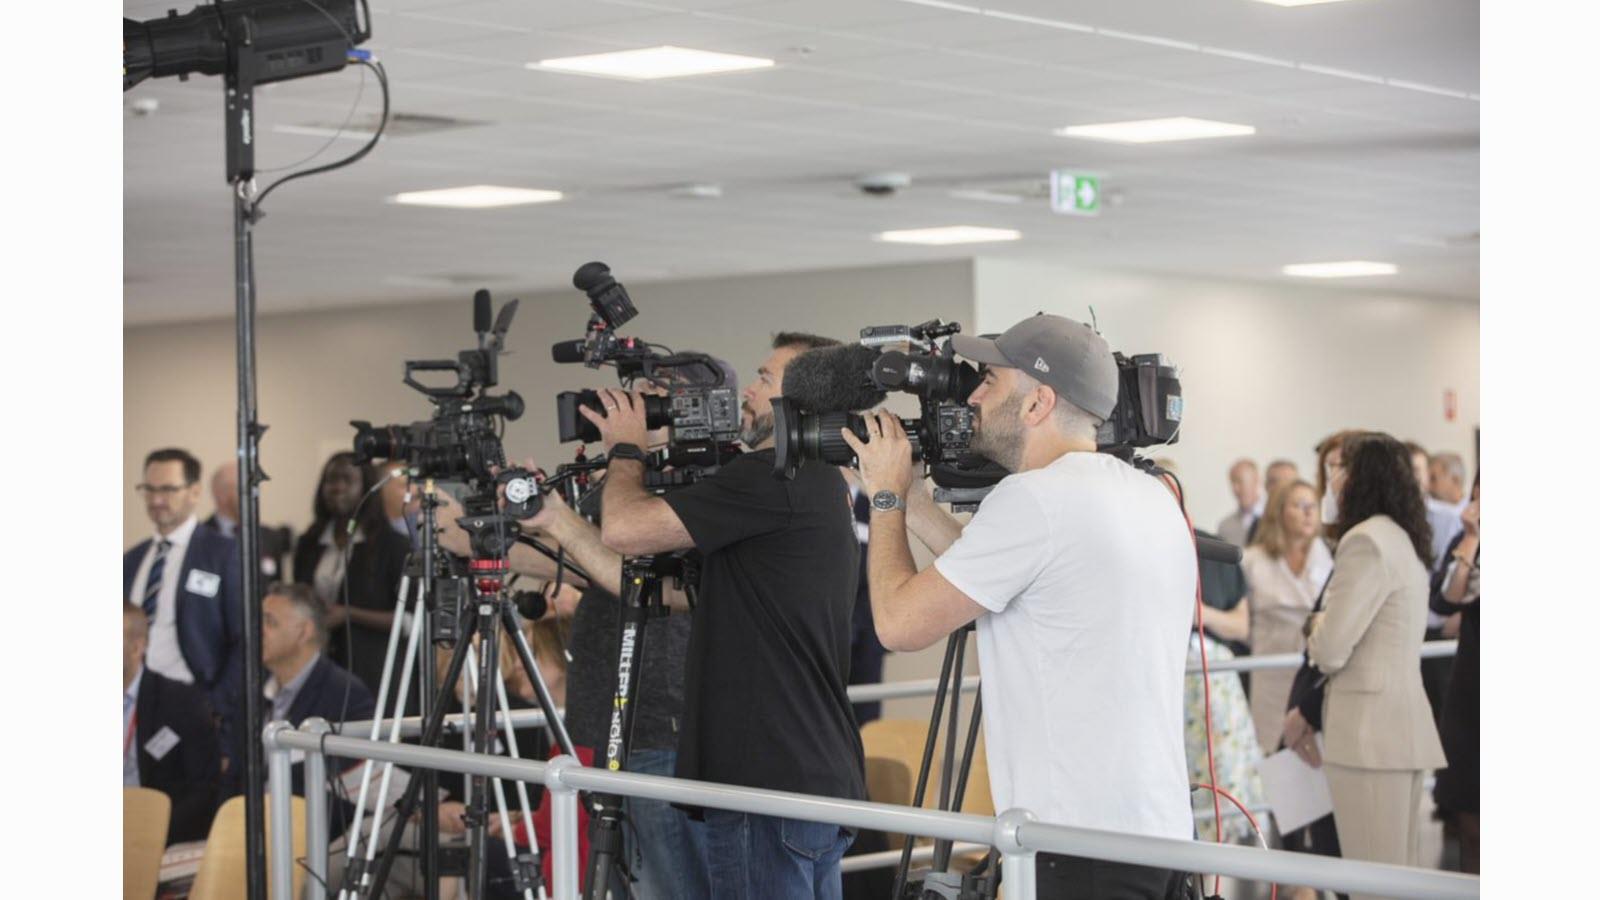 Members of the media with TV cameras at CSL's new fractionation facility launch.